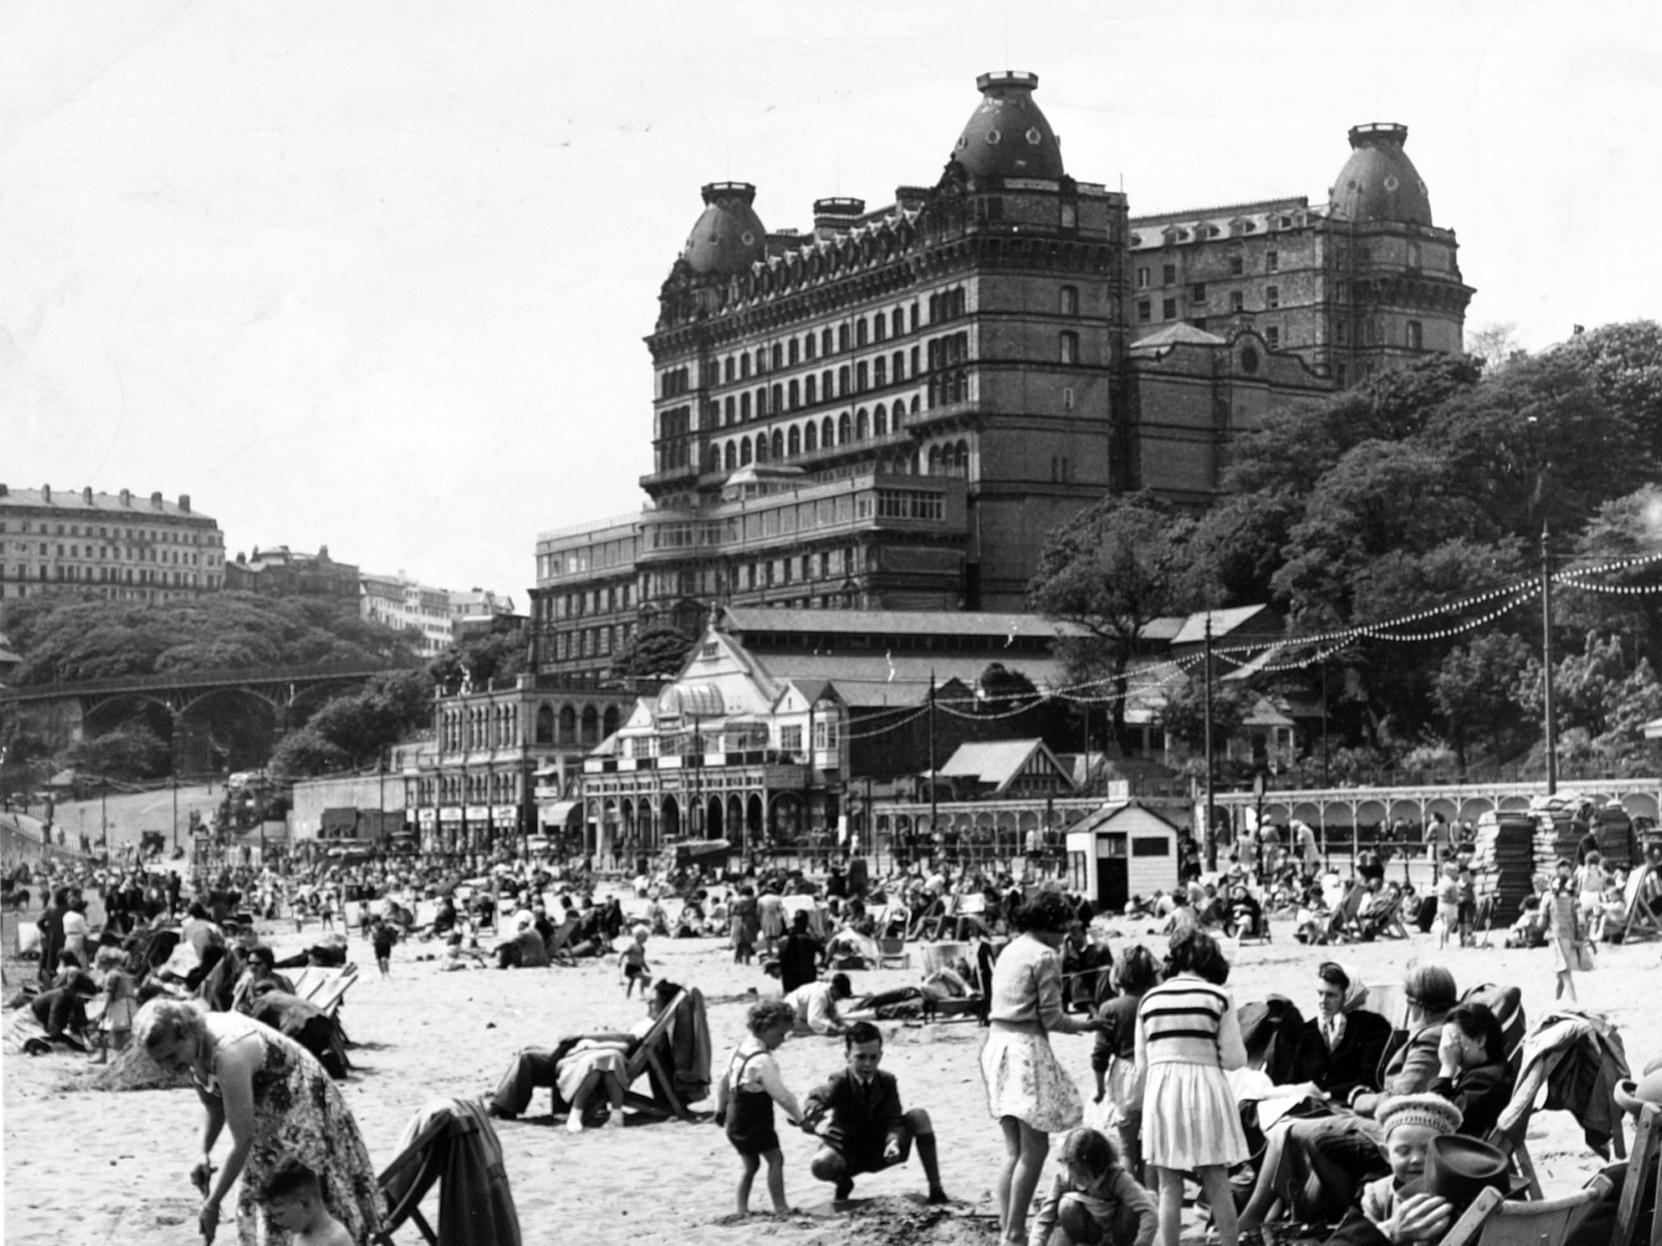 South Bay is busy and the Grand Hotel can be seen, as well as buildings which would go on to be replaced by Olympia amusements.